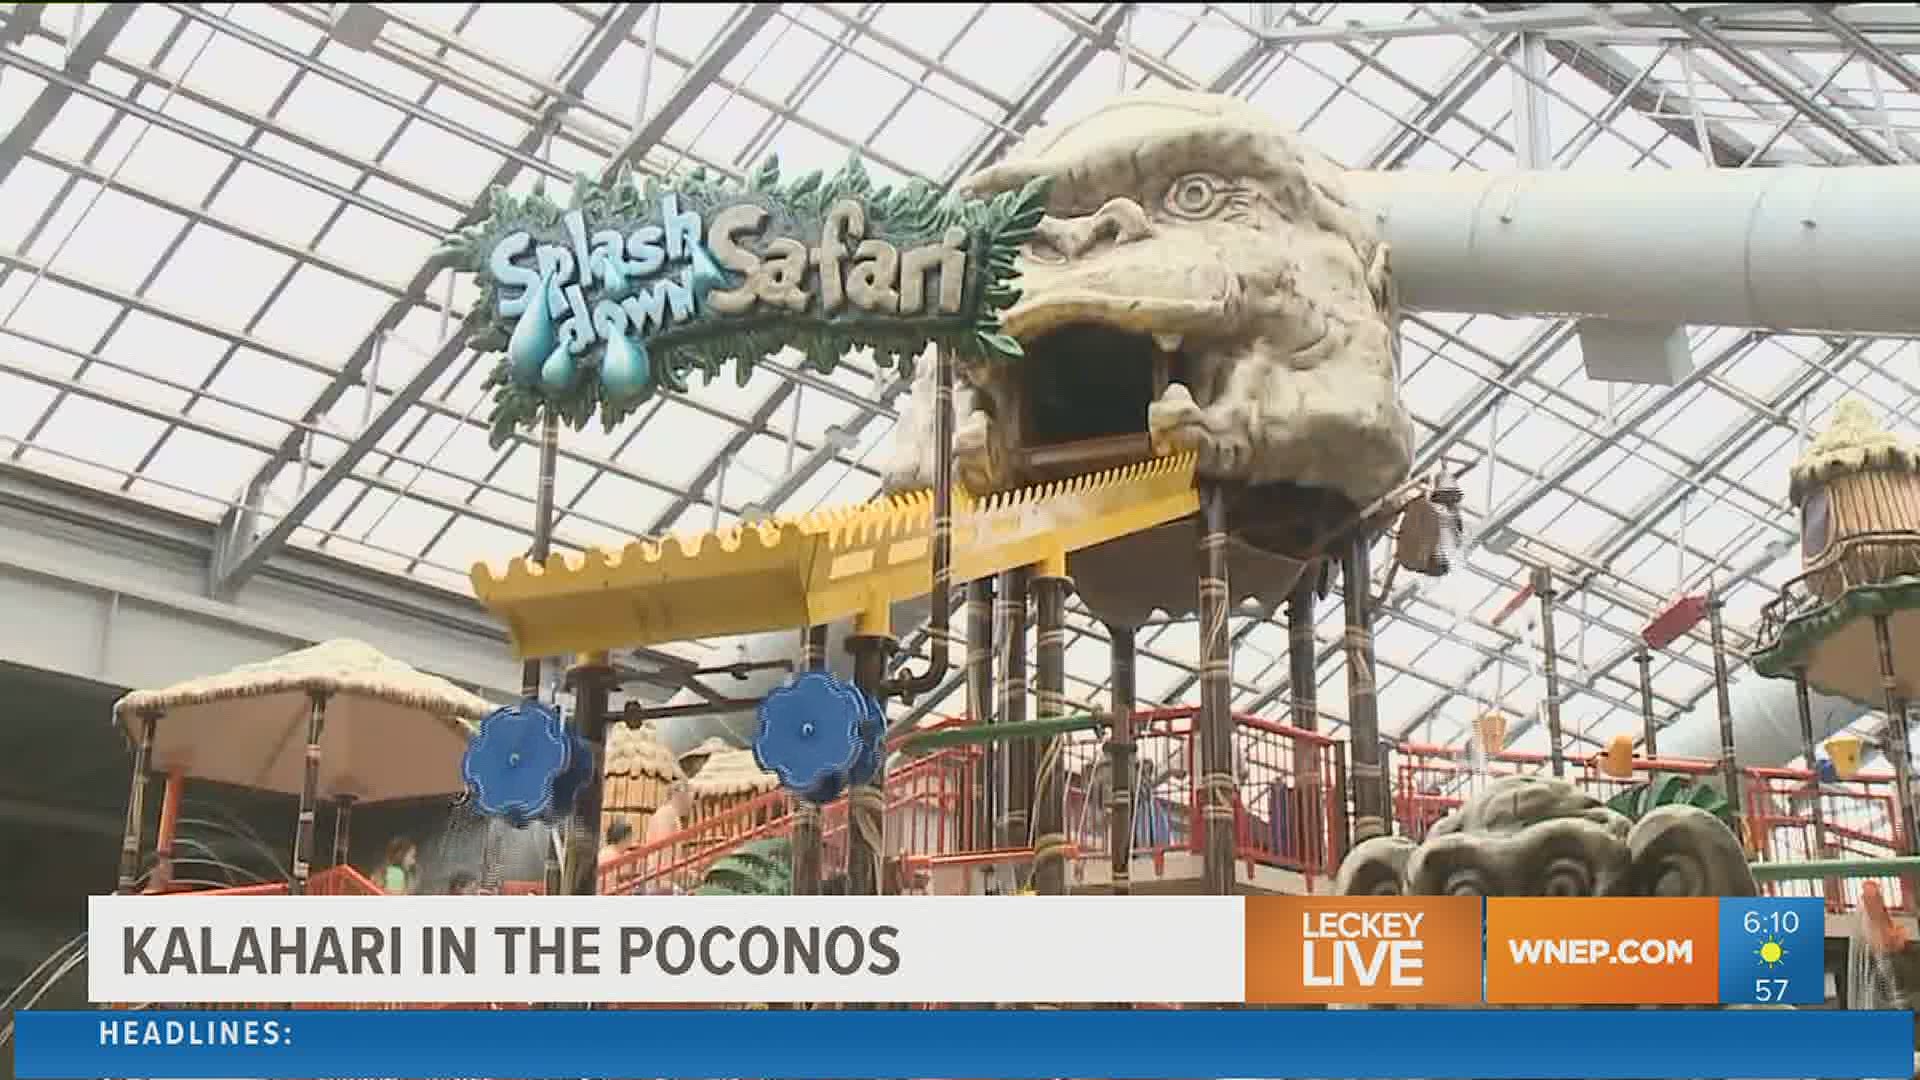 From water parks to resorts, many places are back open for business following the pandemic.